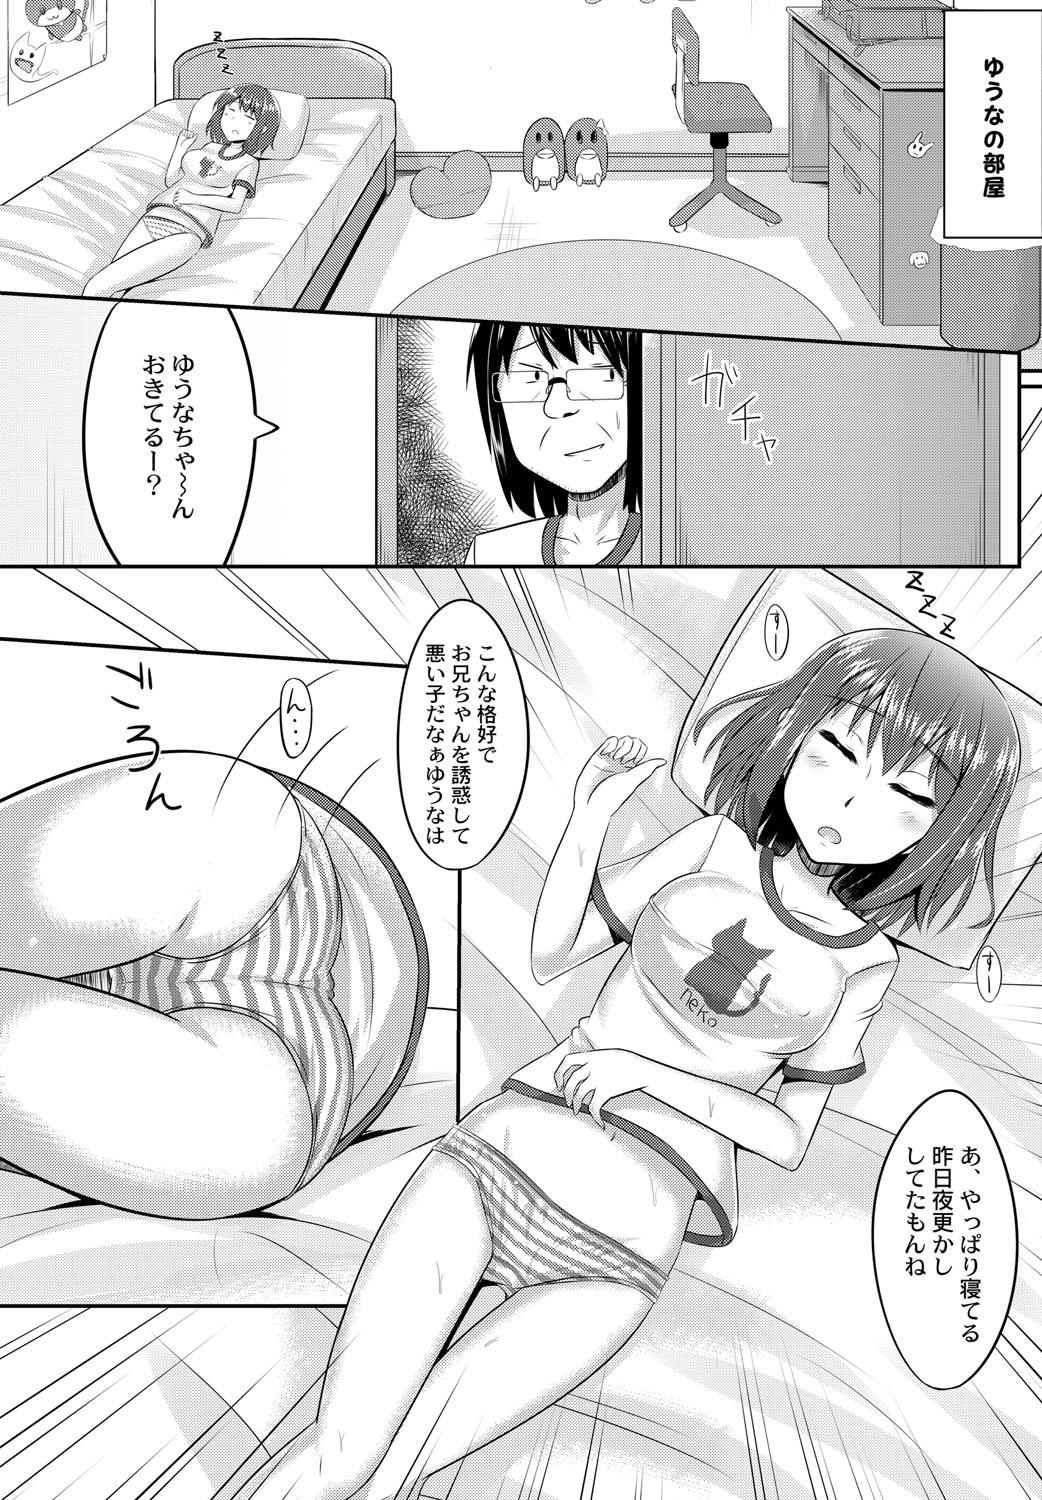 Chacal Sister Temptation Blowjob - Page 5